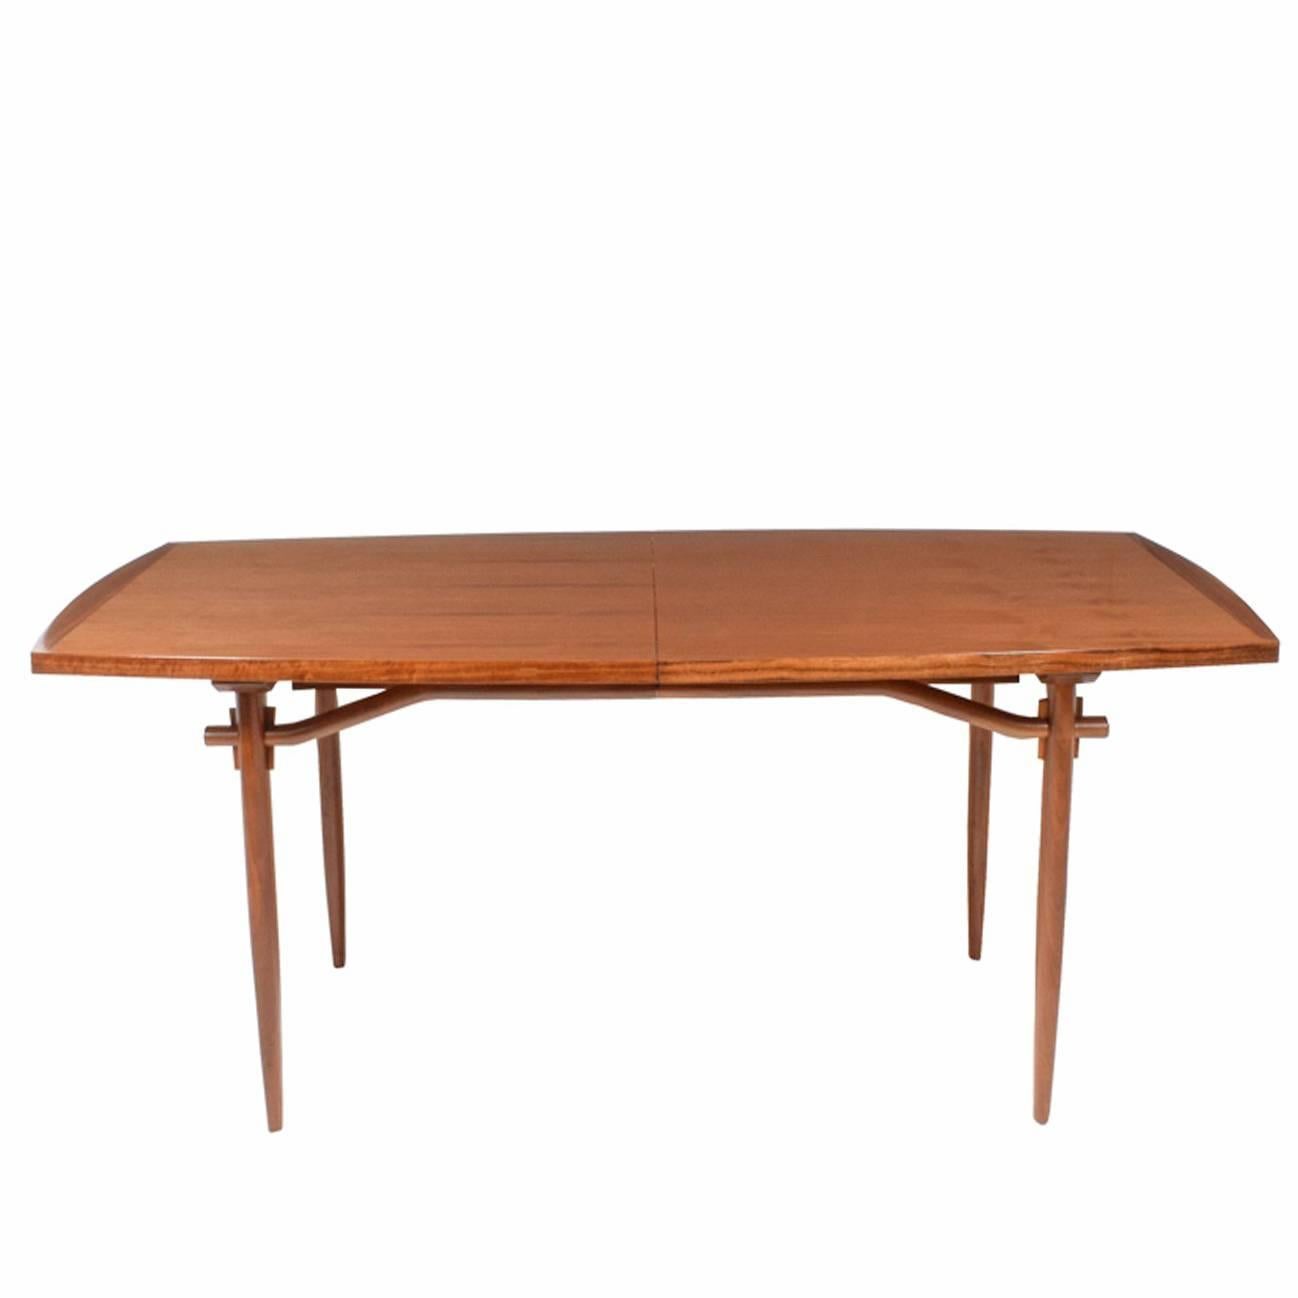 Dining Table # 202-W by George Nakashima for Widdicomb